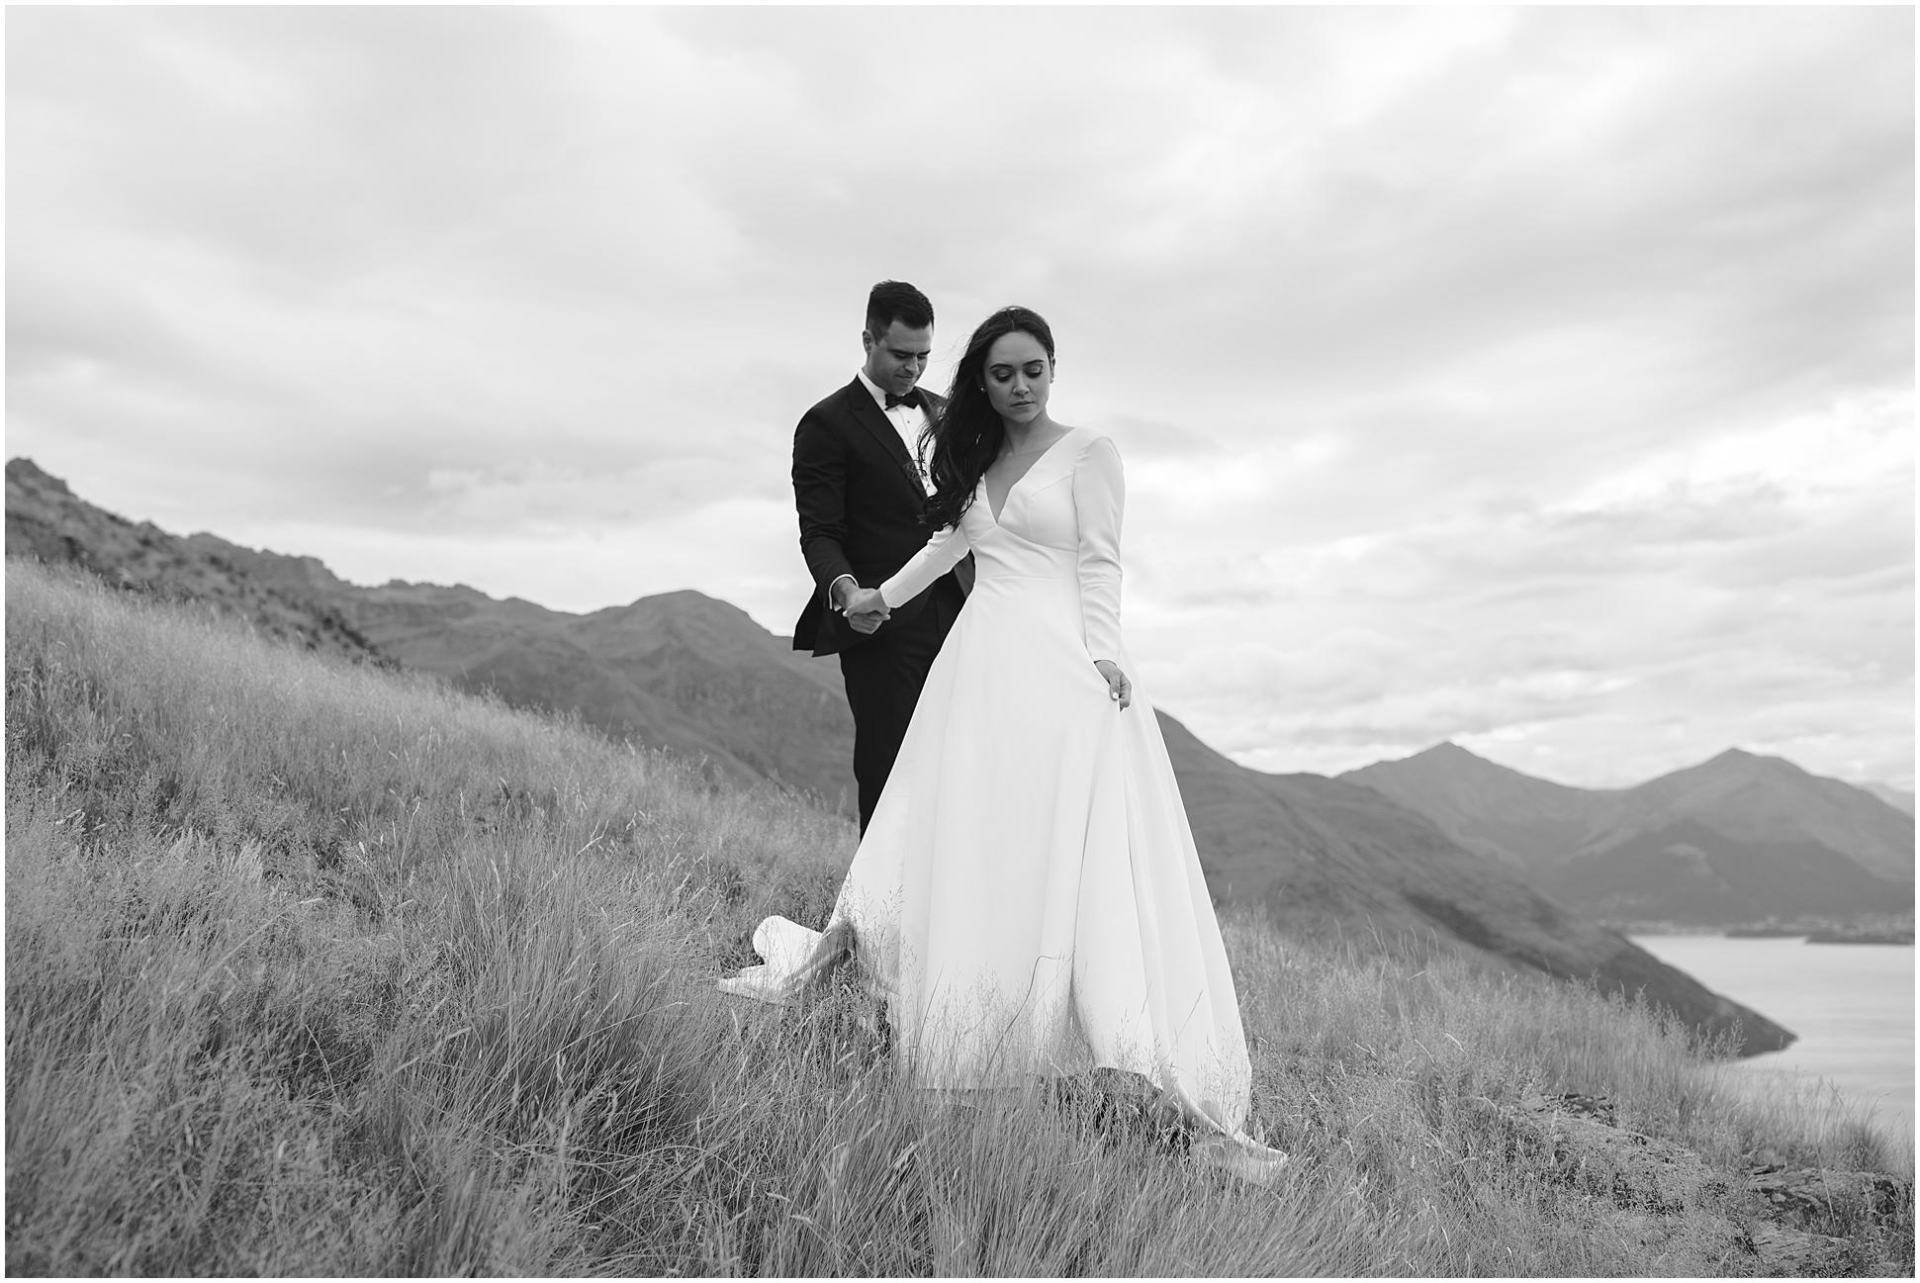 Charlotte Kiri Photography - Wedding Photography black and white image of a bride wearing an elegant V-necked long-sleeve dress with an A-line skirt, walking towards Coromandel Peak and holding hands with her groom who wears a smart black tuxedo suit in Wanaka, New Zealand.